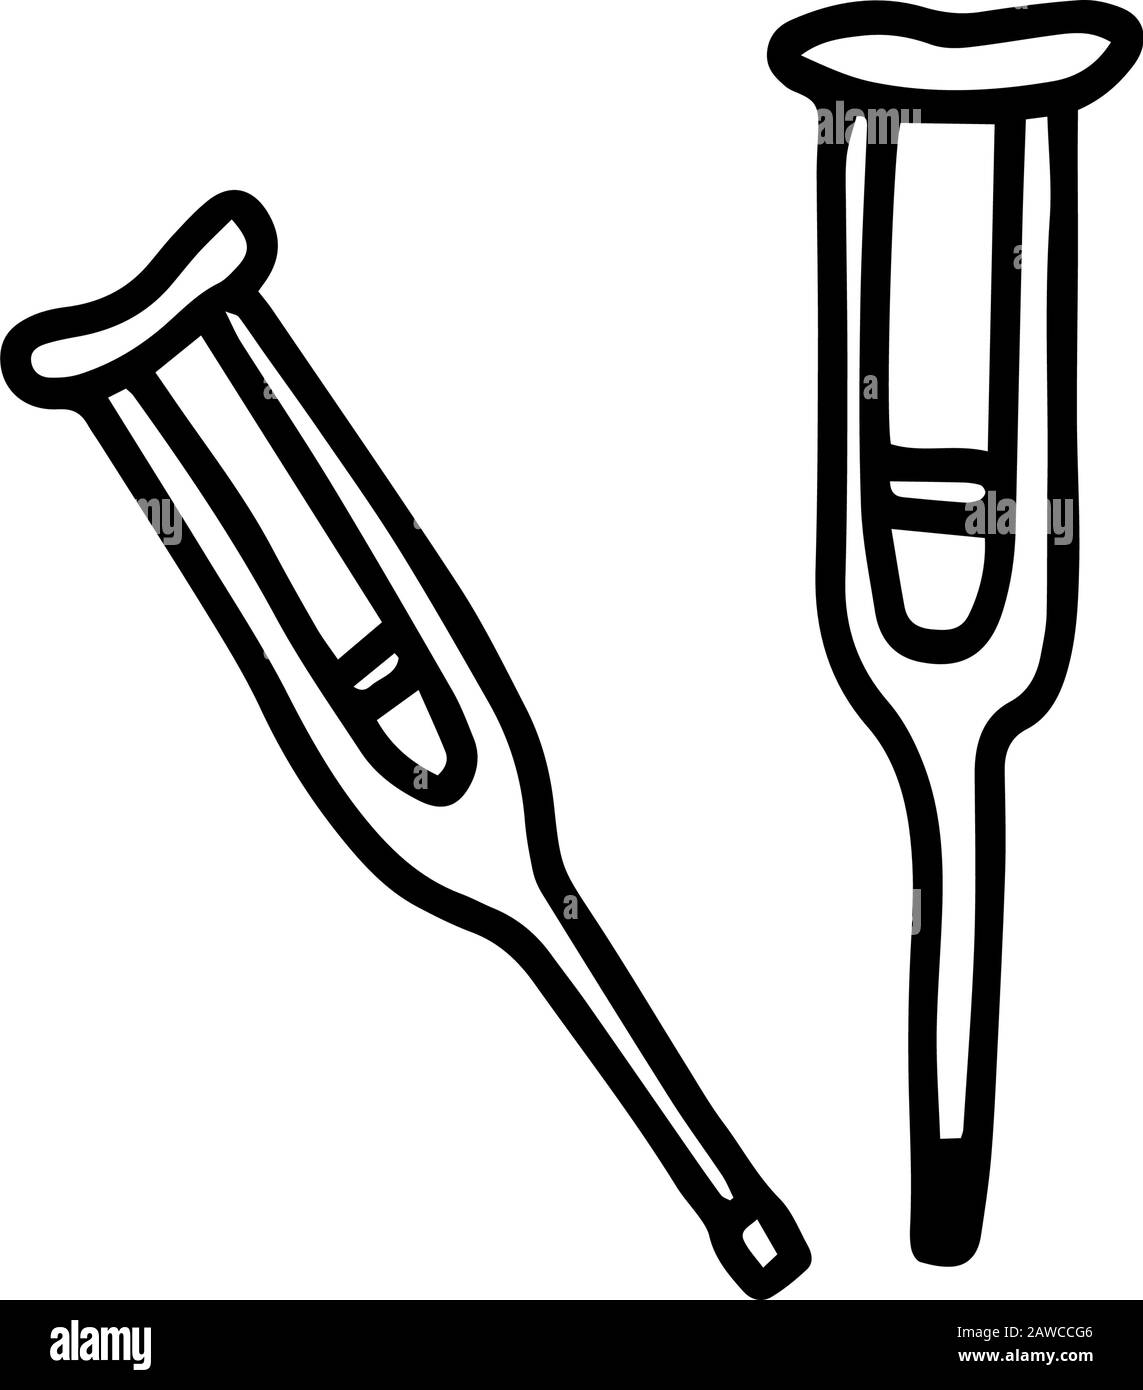 rutches in hand drawn doodle style isolated on white background. Vector stock outline illustration. Single dog-nail. Sign spike element. Medical equip Stock Vector